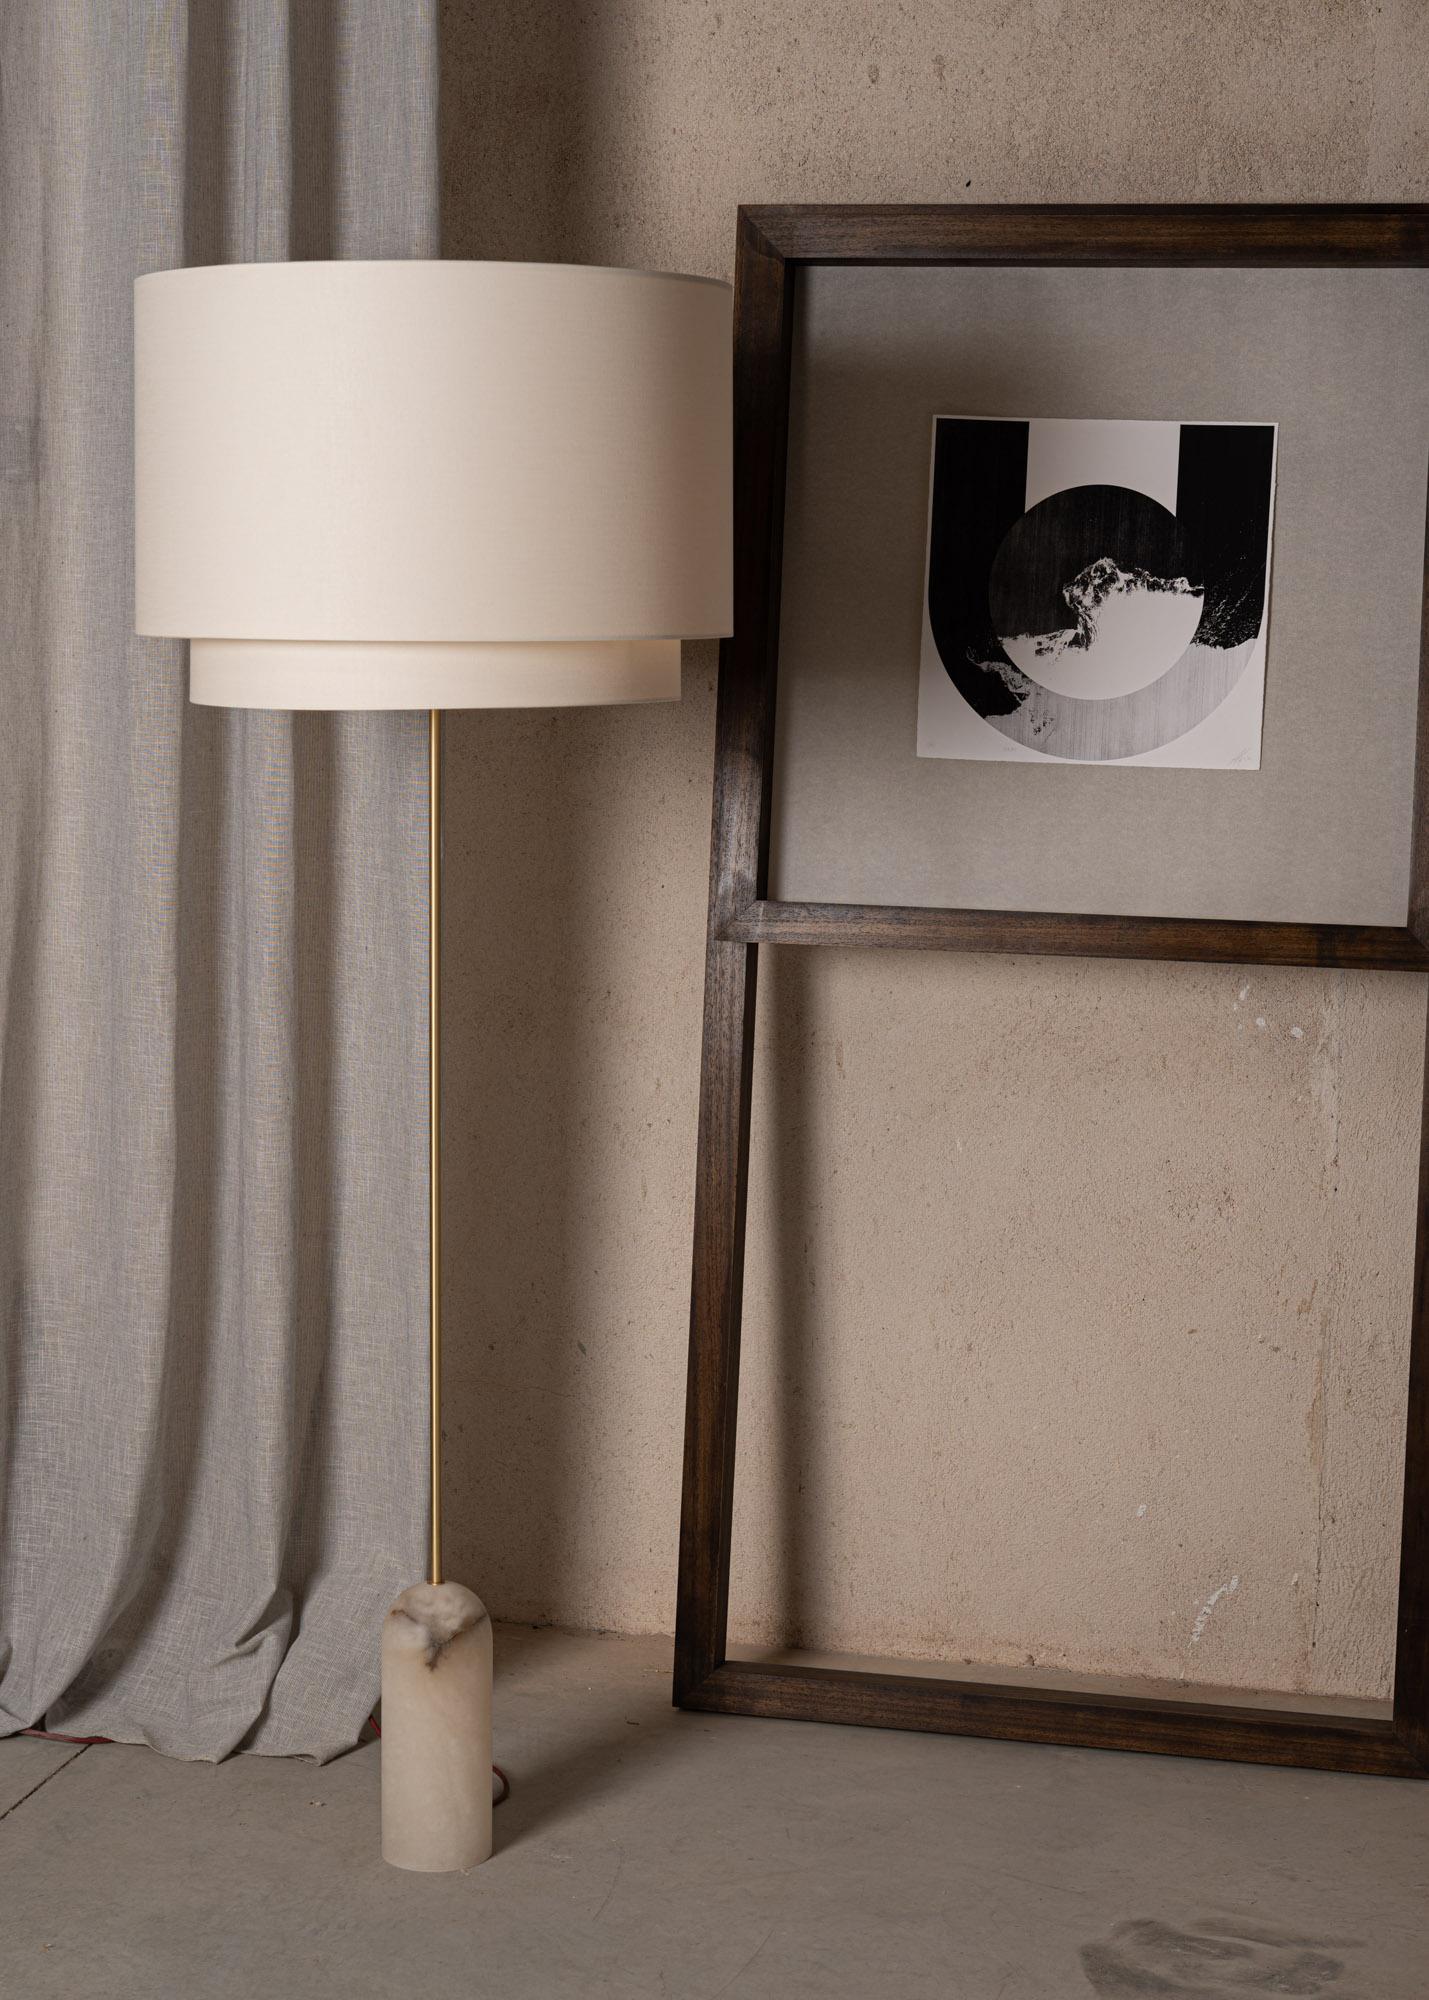 Pendolo Duoblo White Alabaster Floor Lamp by Simone & Marcel
Dimensions: D 60 x W 60 x H 176 cm.
Materials: Brass, cotton and white alabaster.

Also available in different marble and alabaster options and finishes. Custom options available on